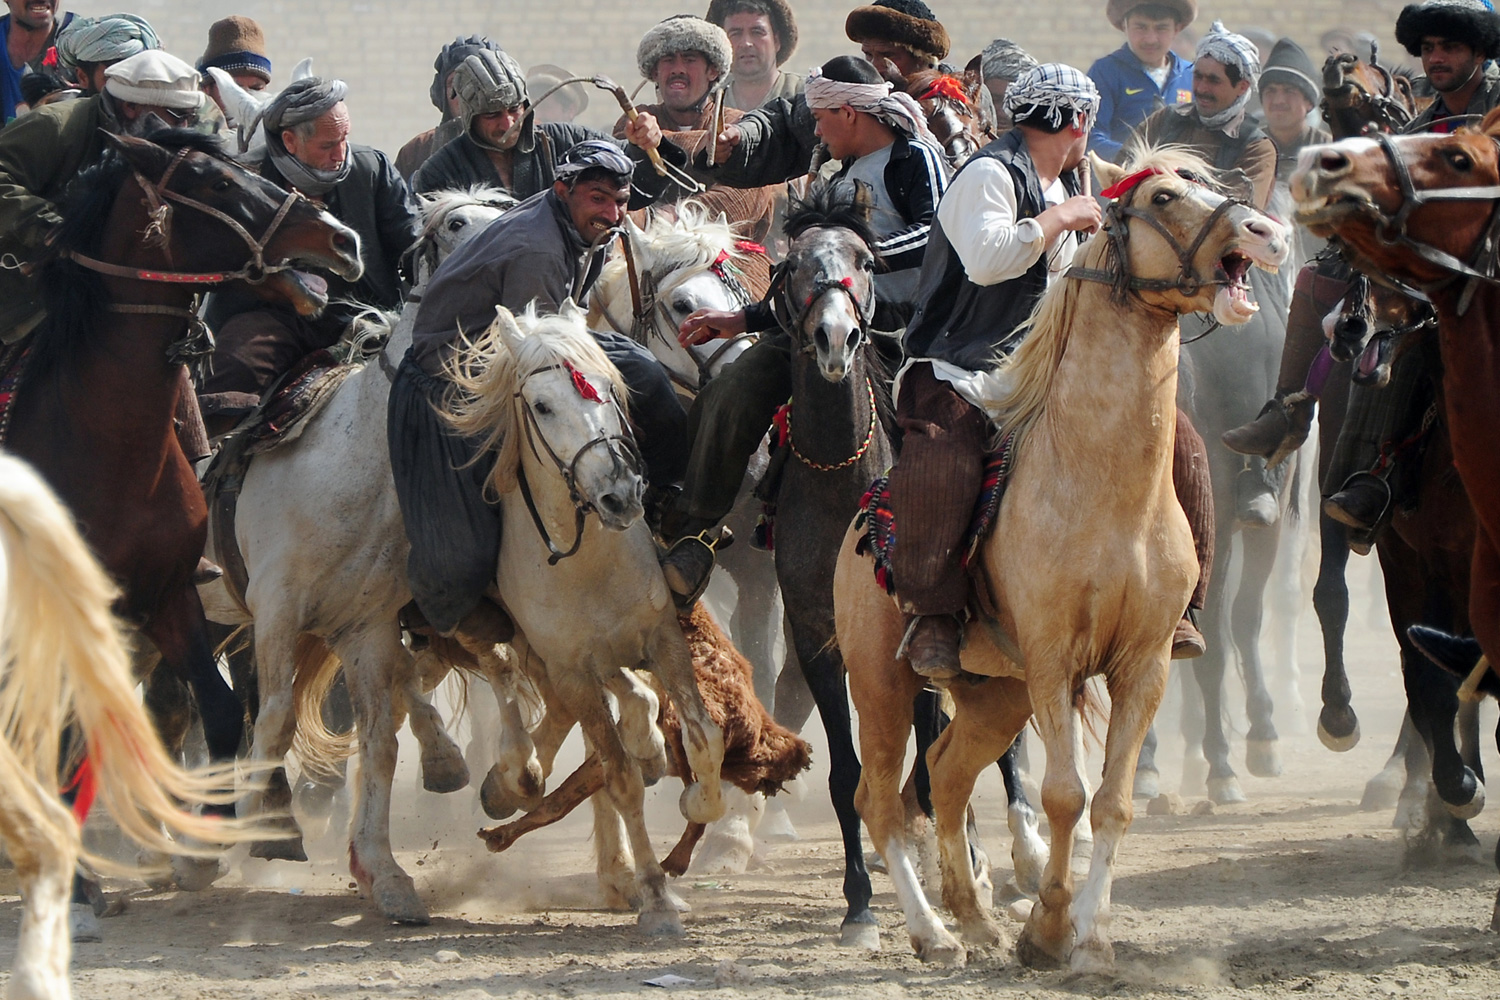 March 23, 2012. Afghan men compete with horses during the traditional Afghan sport Buzkashi in Mazar-i Sharif, Afghanistan.